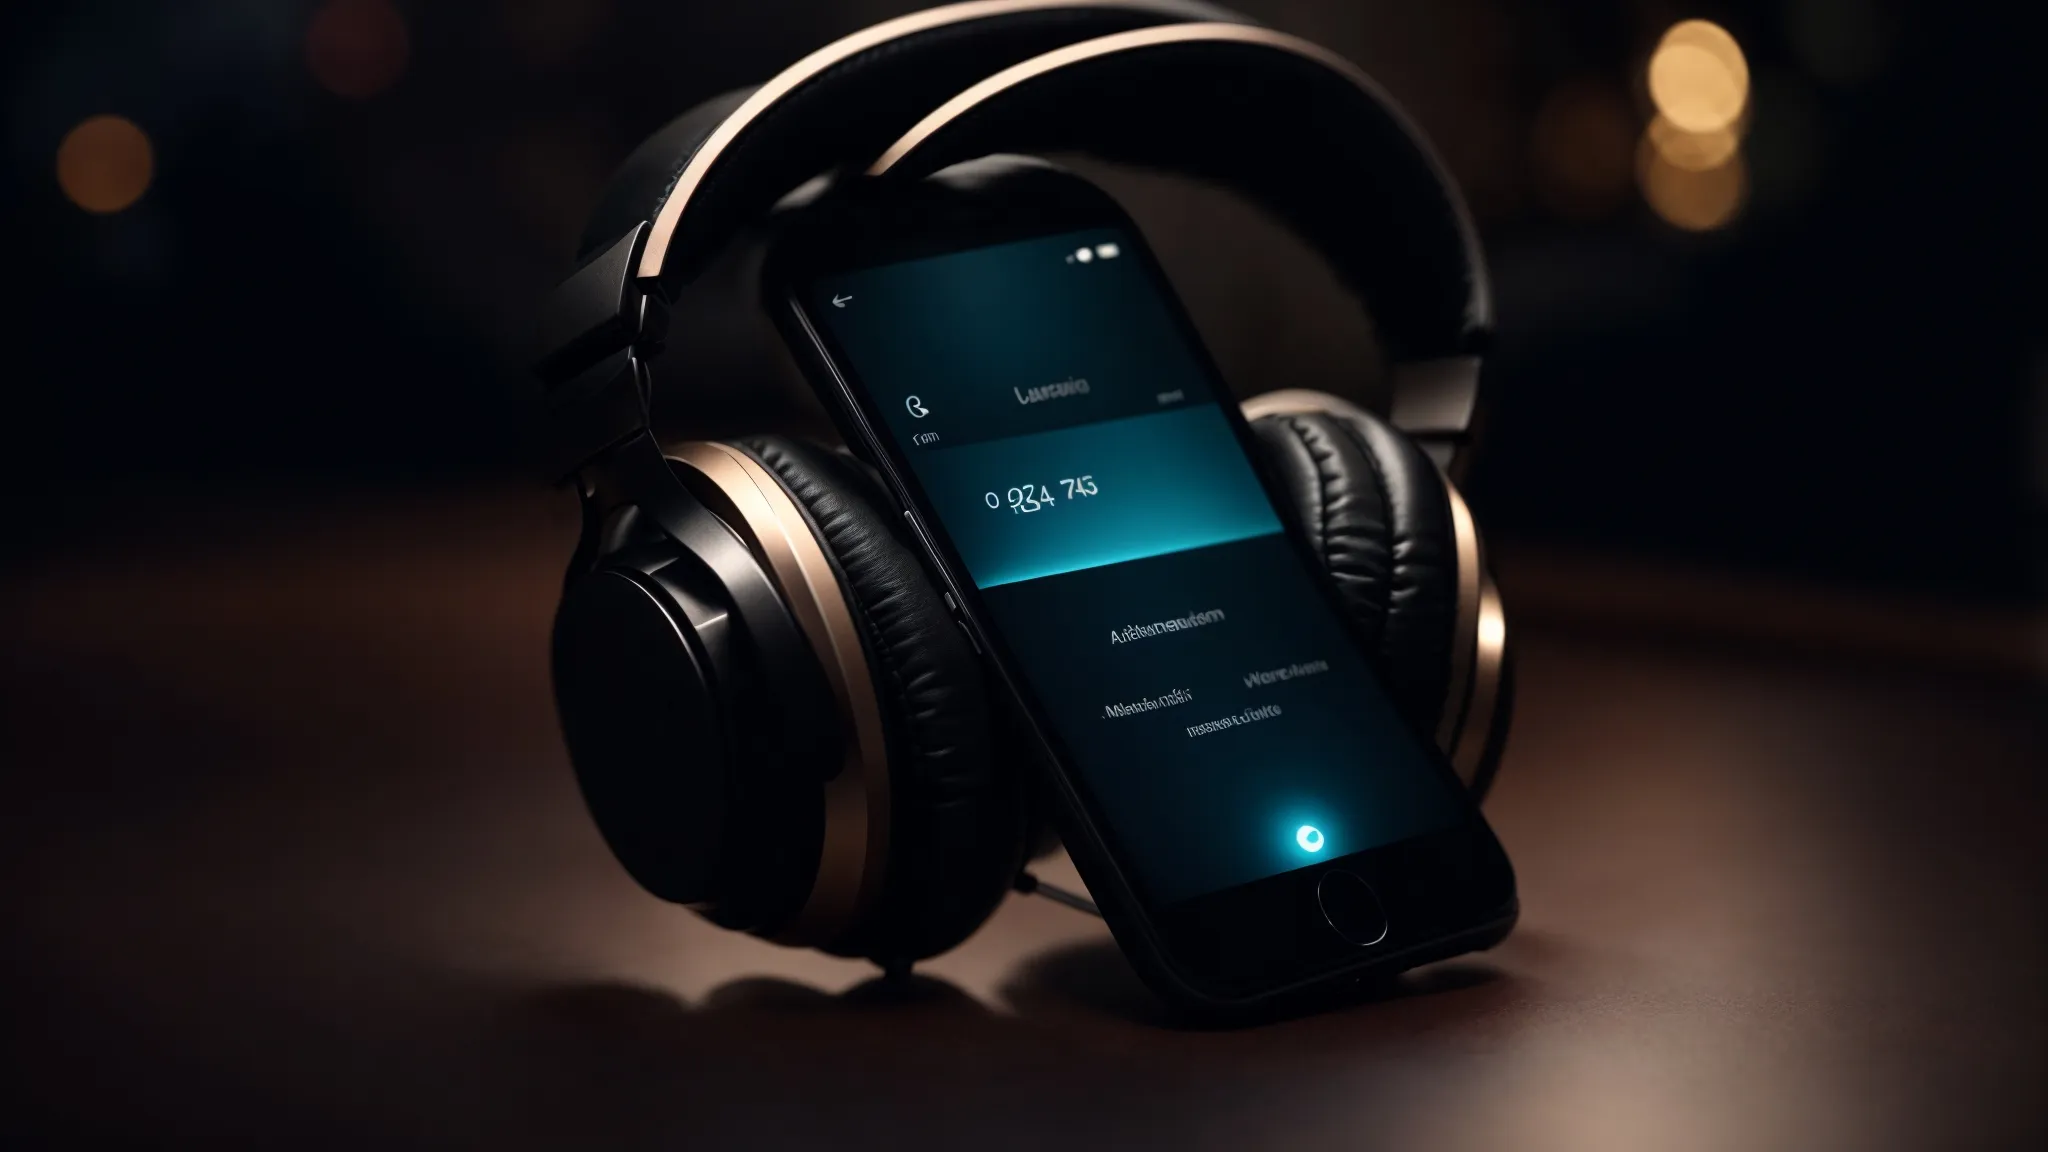 a pair of headphones rests on a modern smartphone with a soft glowing screen showcasing a generic music application interface, set against a dark, blurred background.